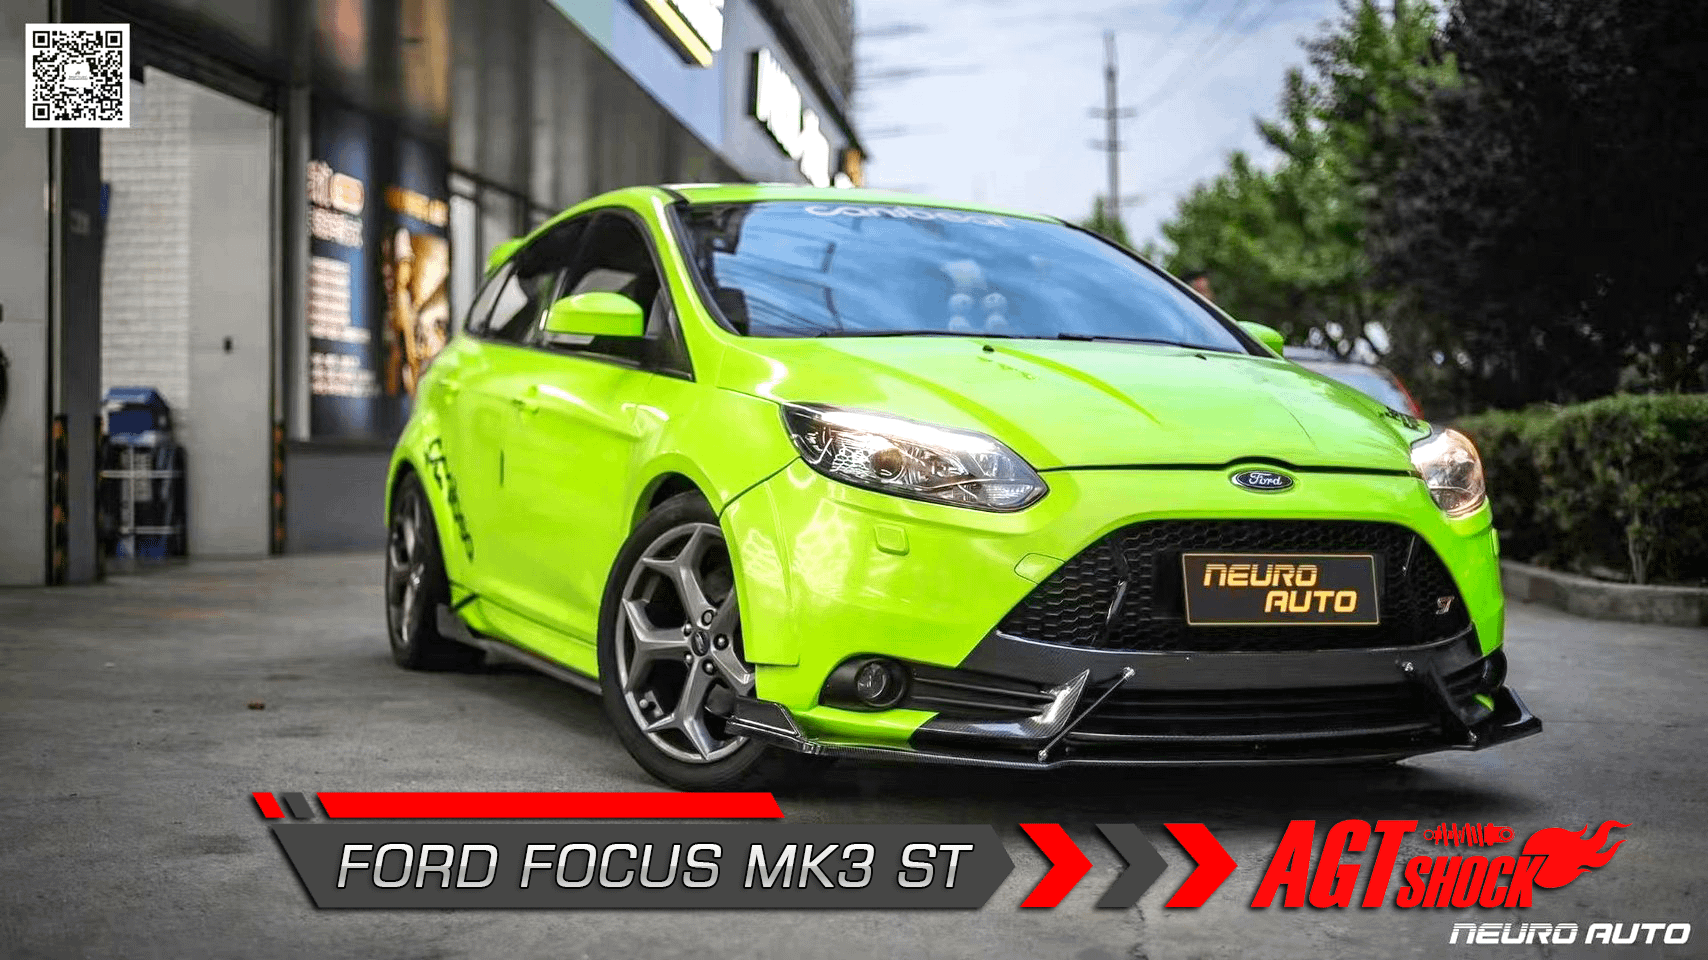 Ford Focus MK3 ST ( incl. Wagon ) - AGT-Shock Coilover